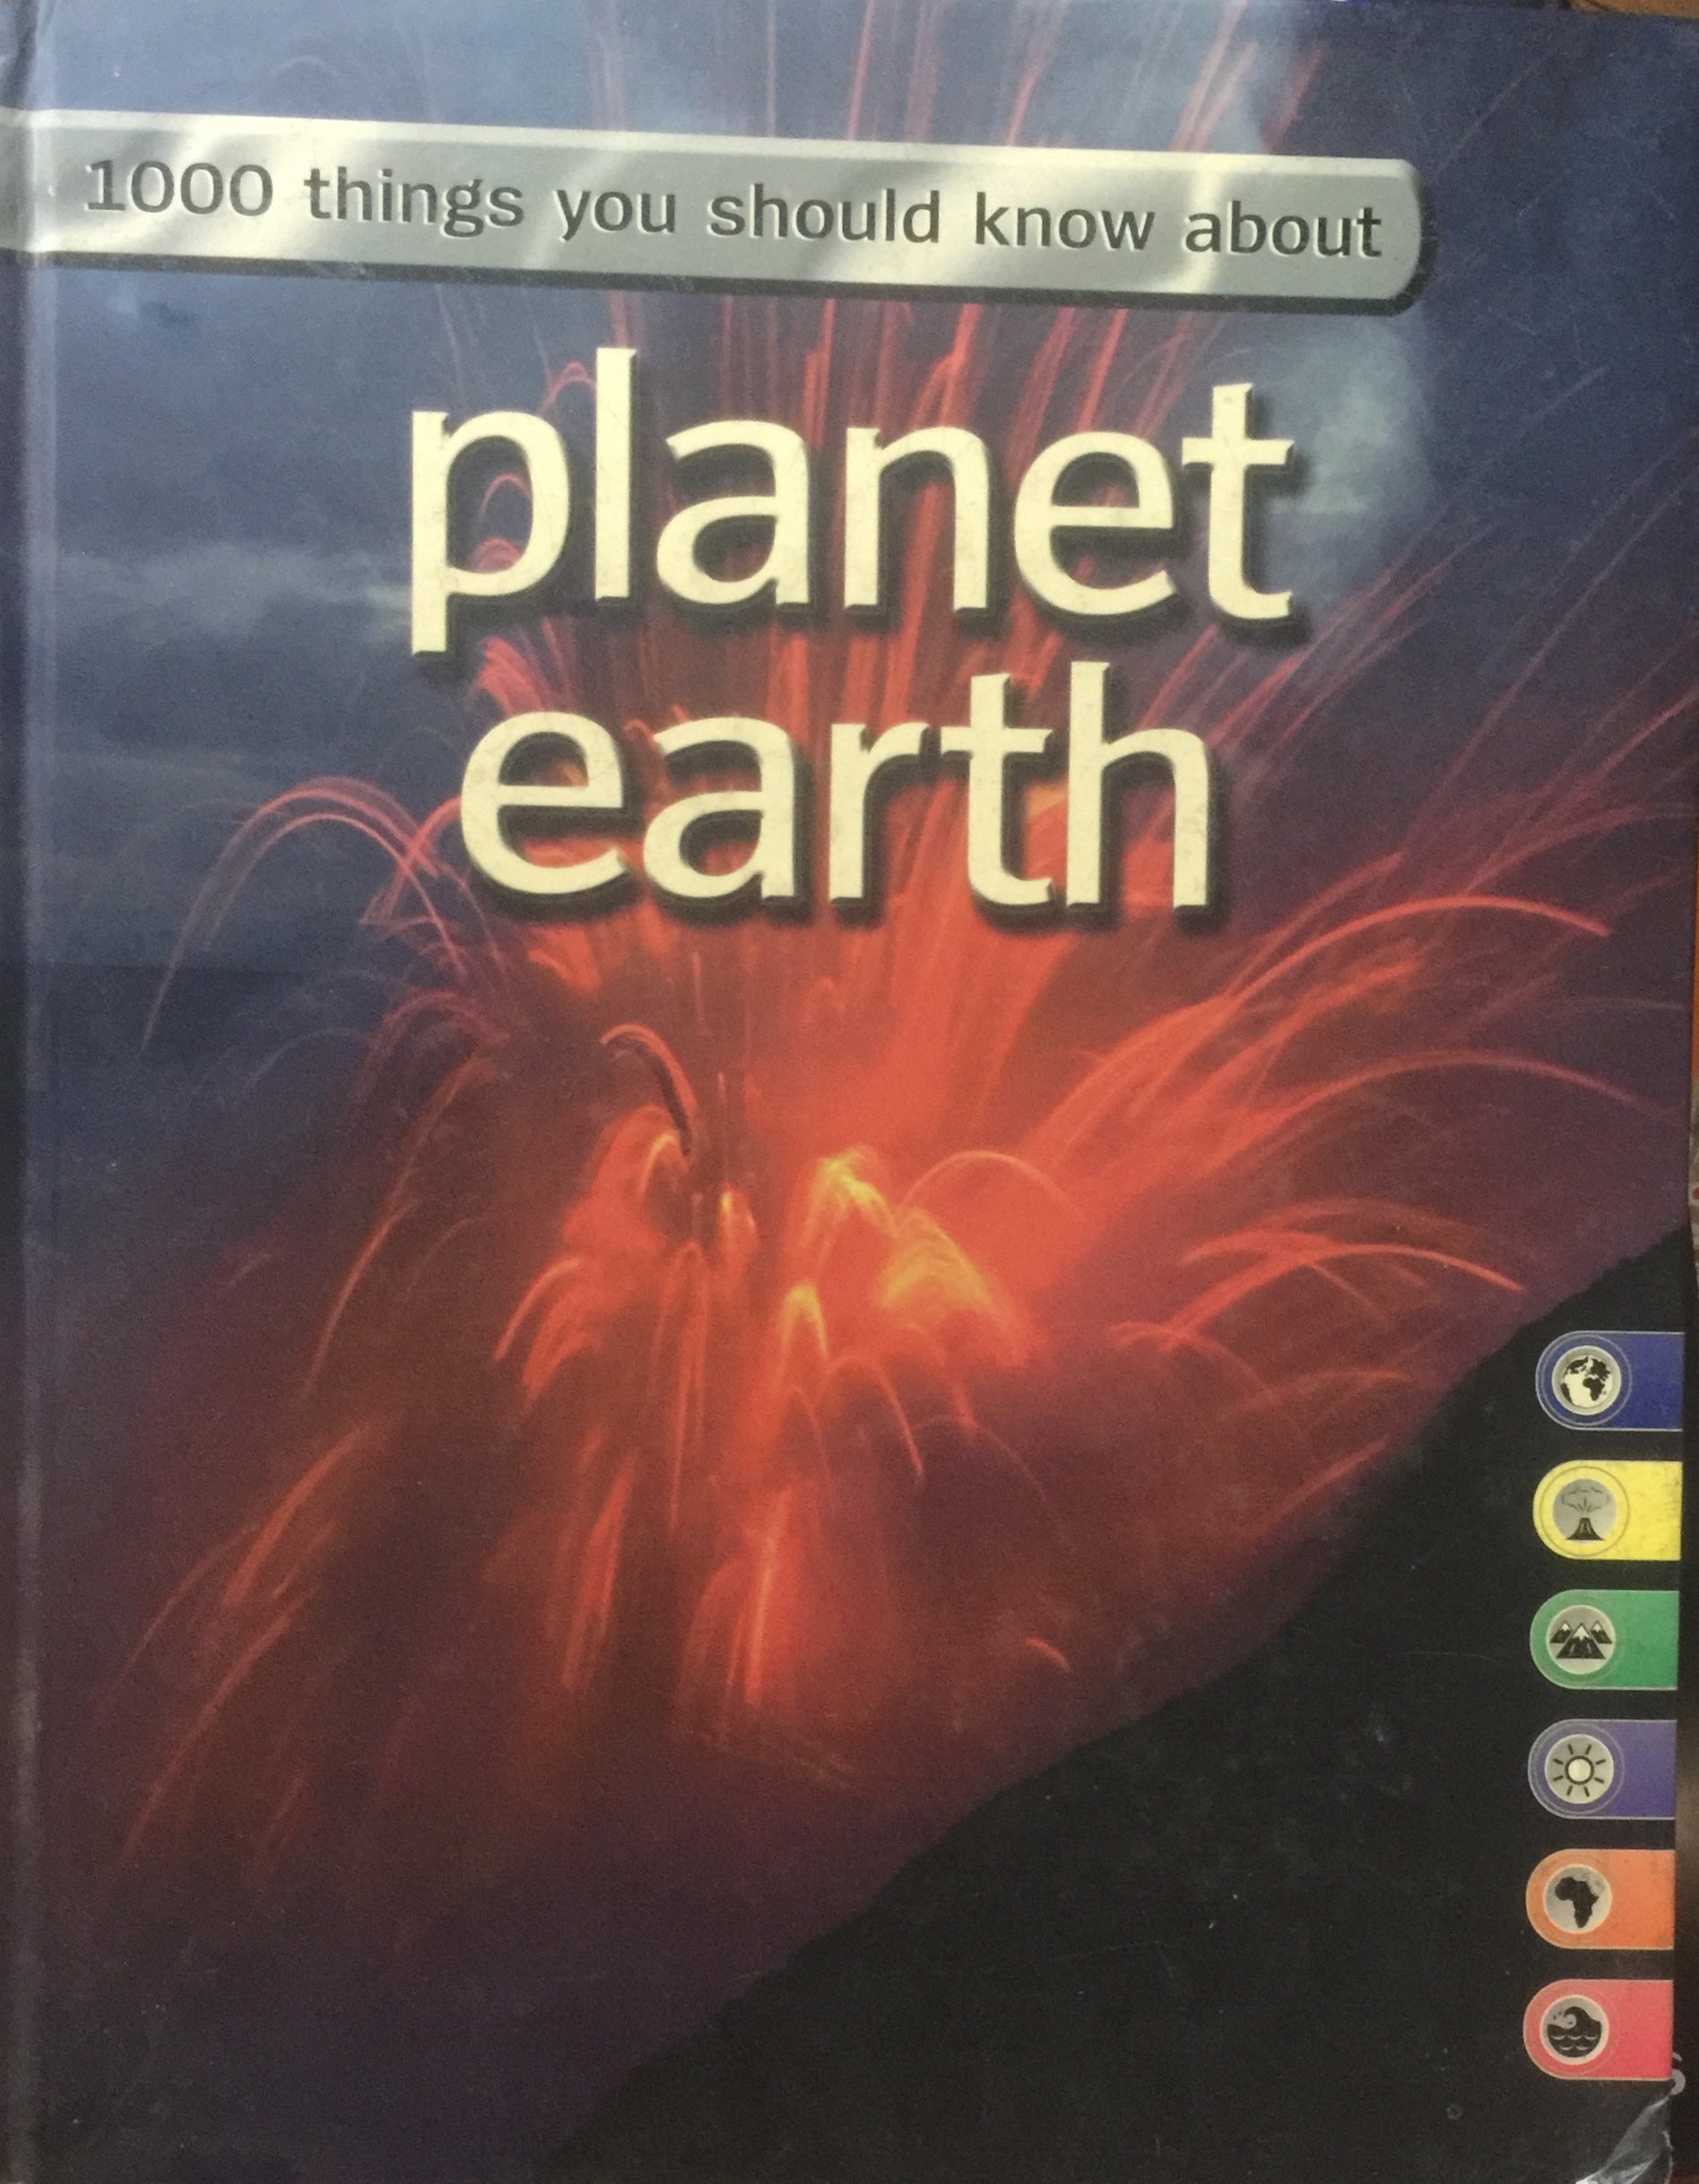 1000 Things You Should Know About Planet Earth (Hard Cover) (Grolier)  Inspire Bookspace Books inspire-bookspace.myshopify.com Half Price Books India